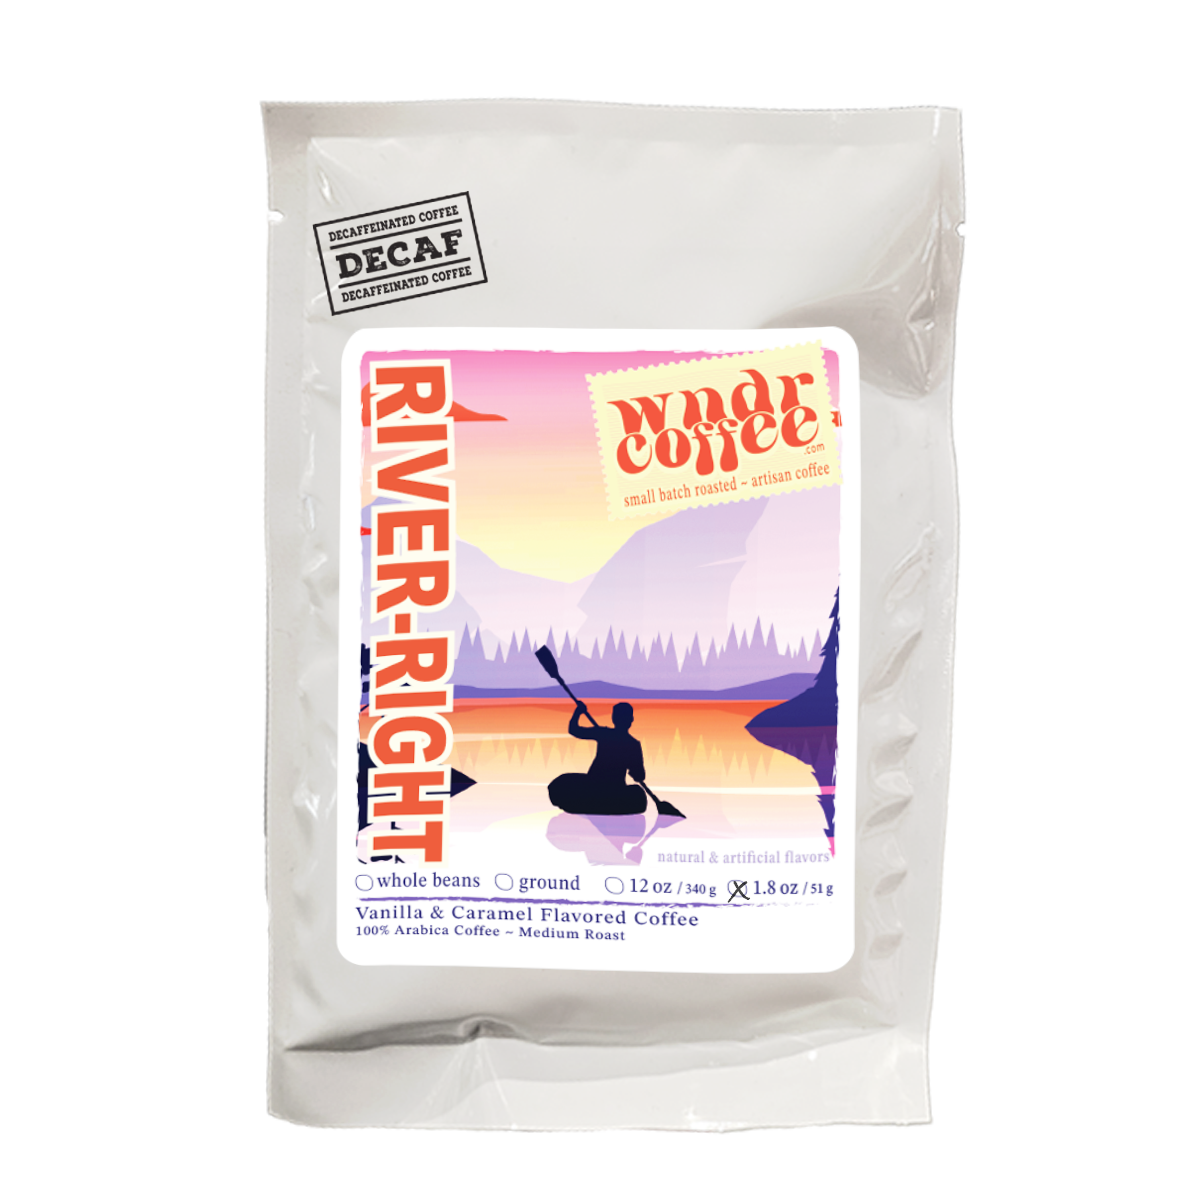 DECAF-1.8oz-bag-River-Right-Flavored-Coffee